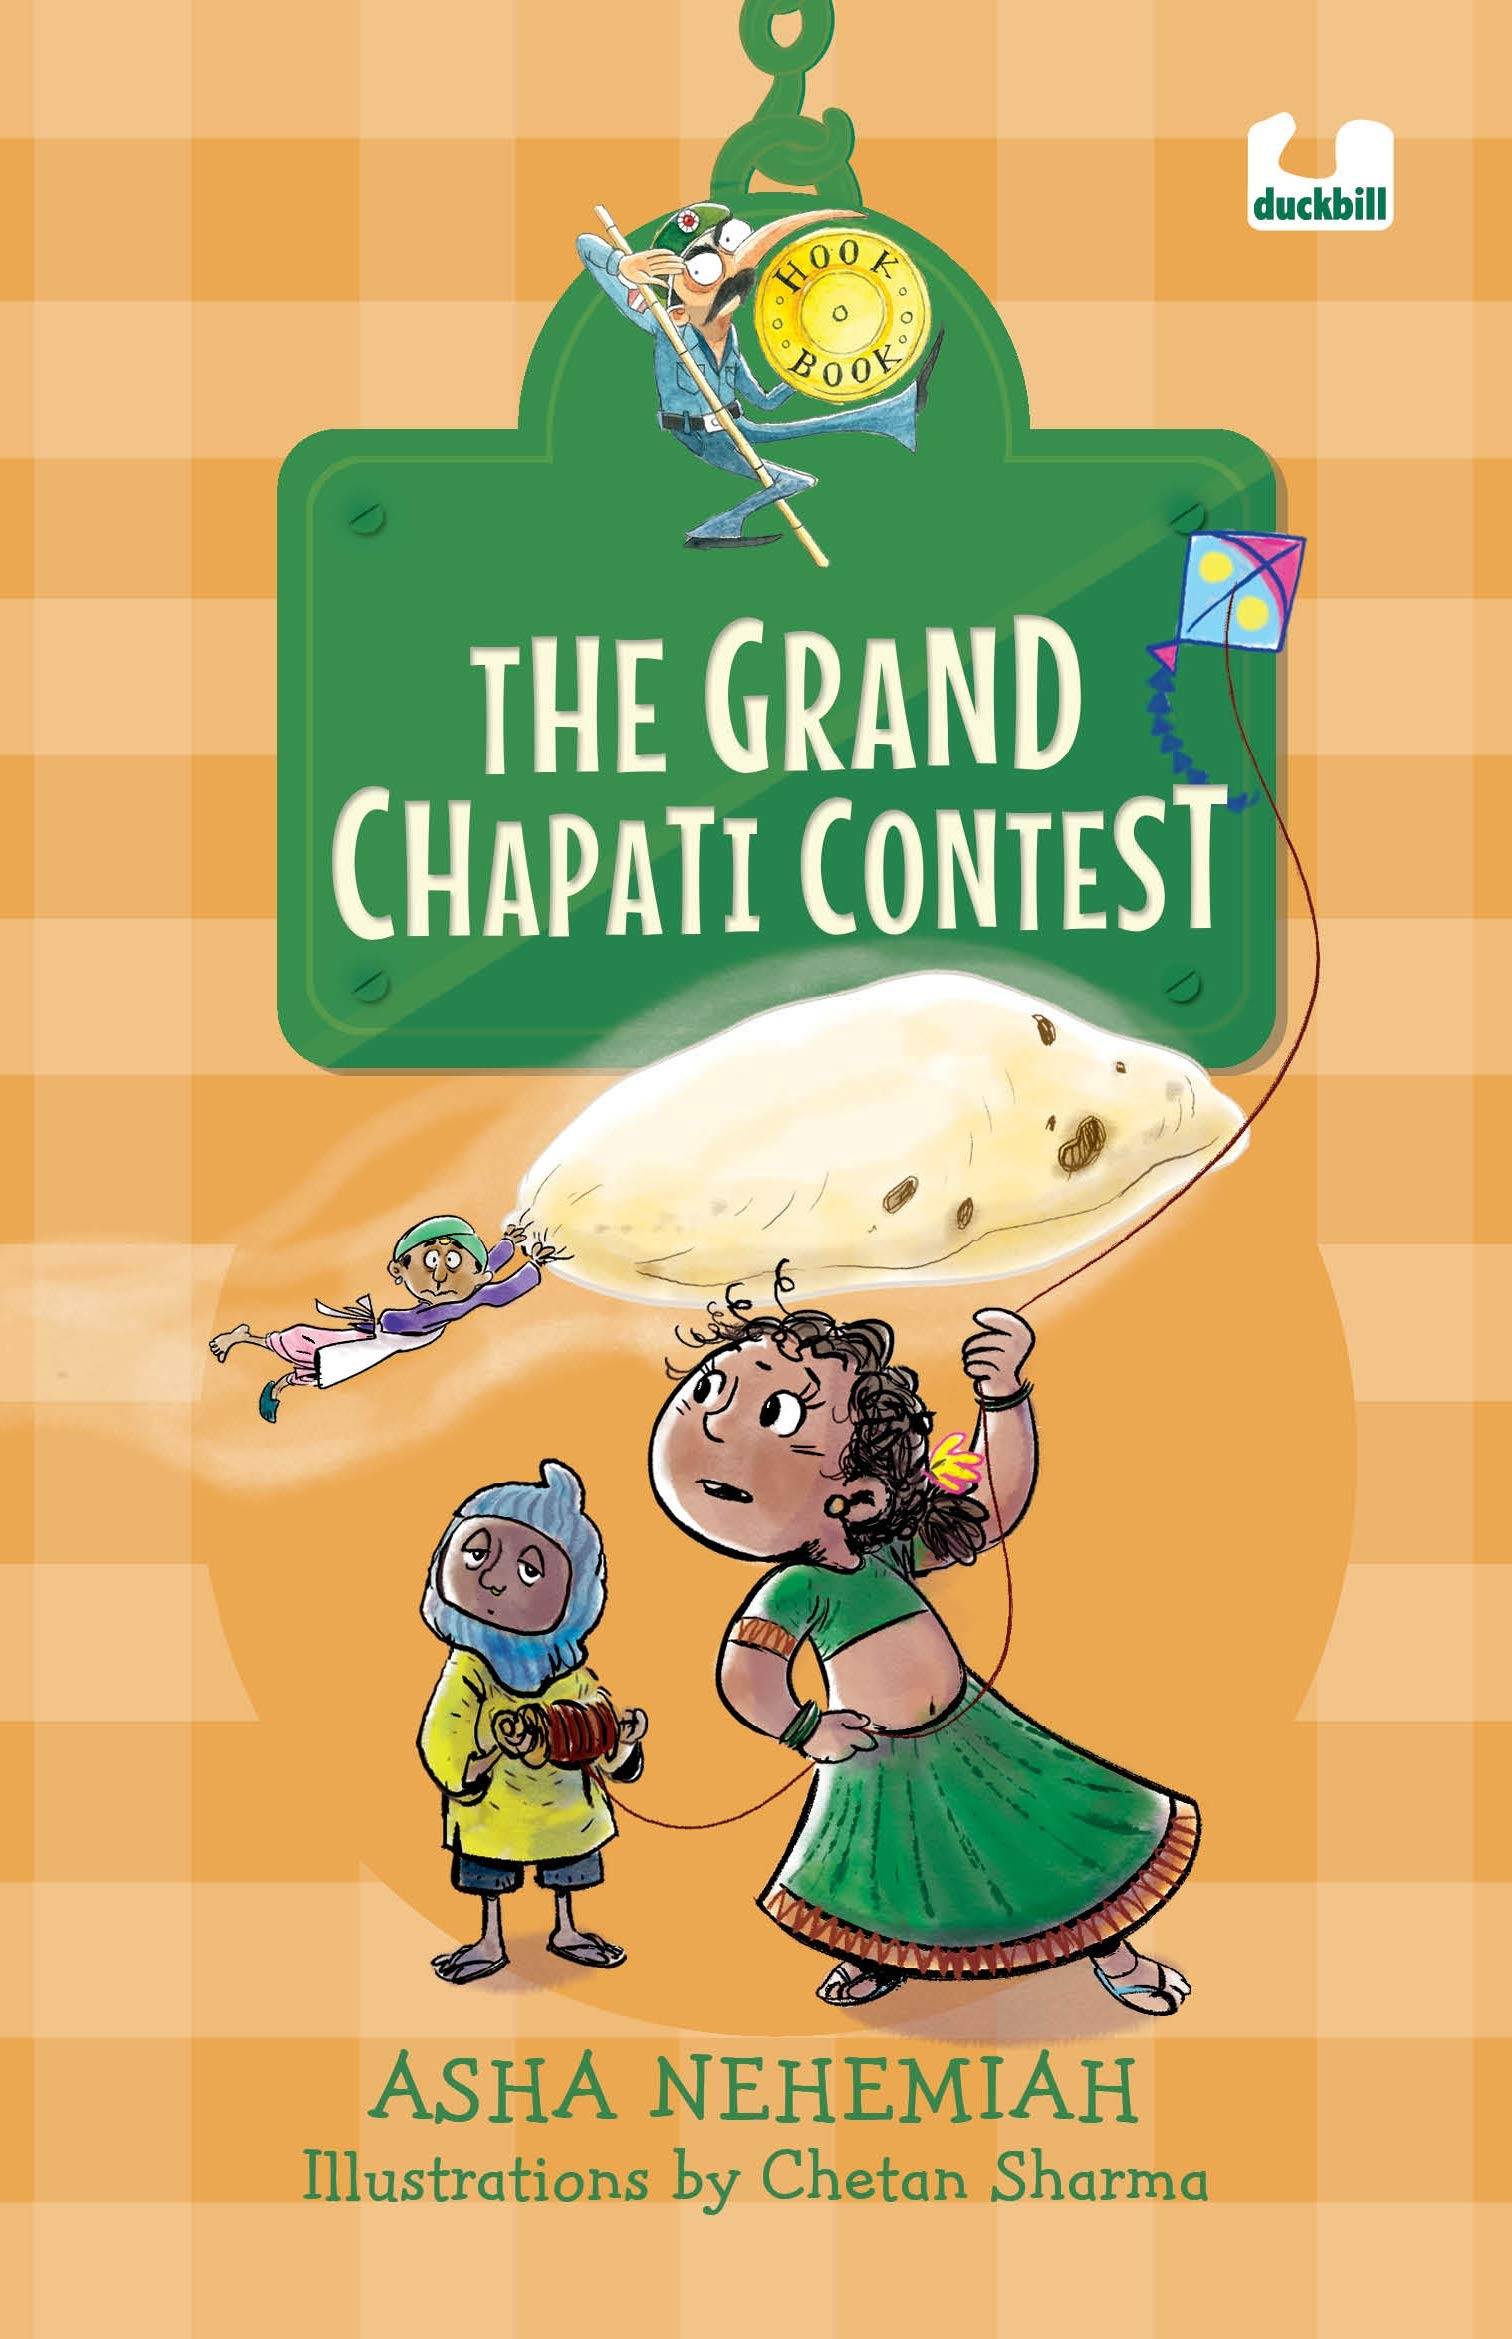 IMG : Hook Book The Grand Chapati Contest